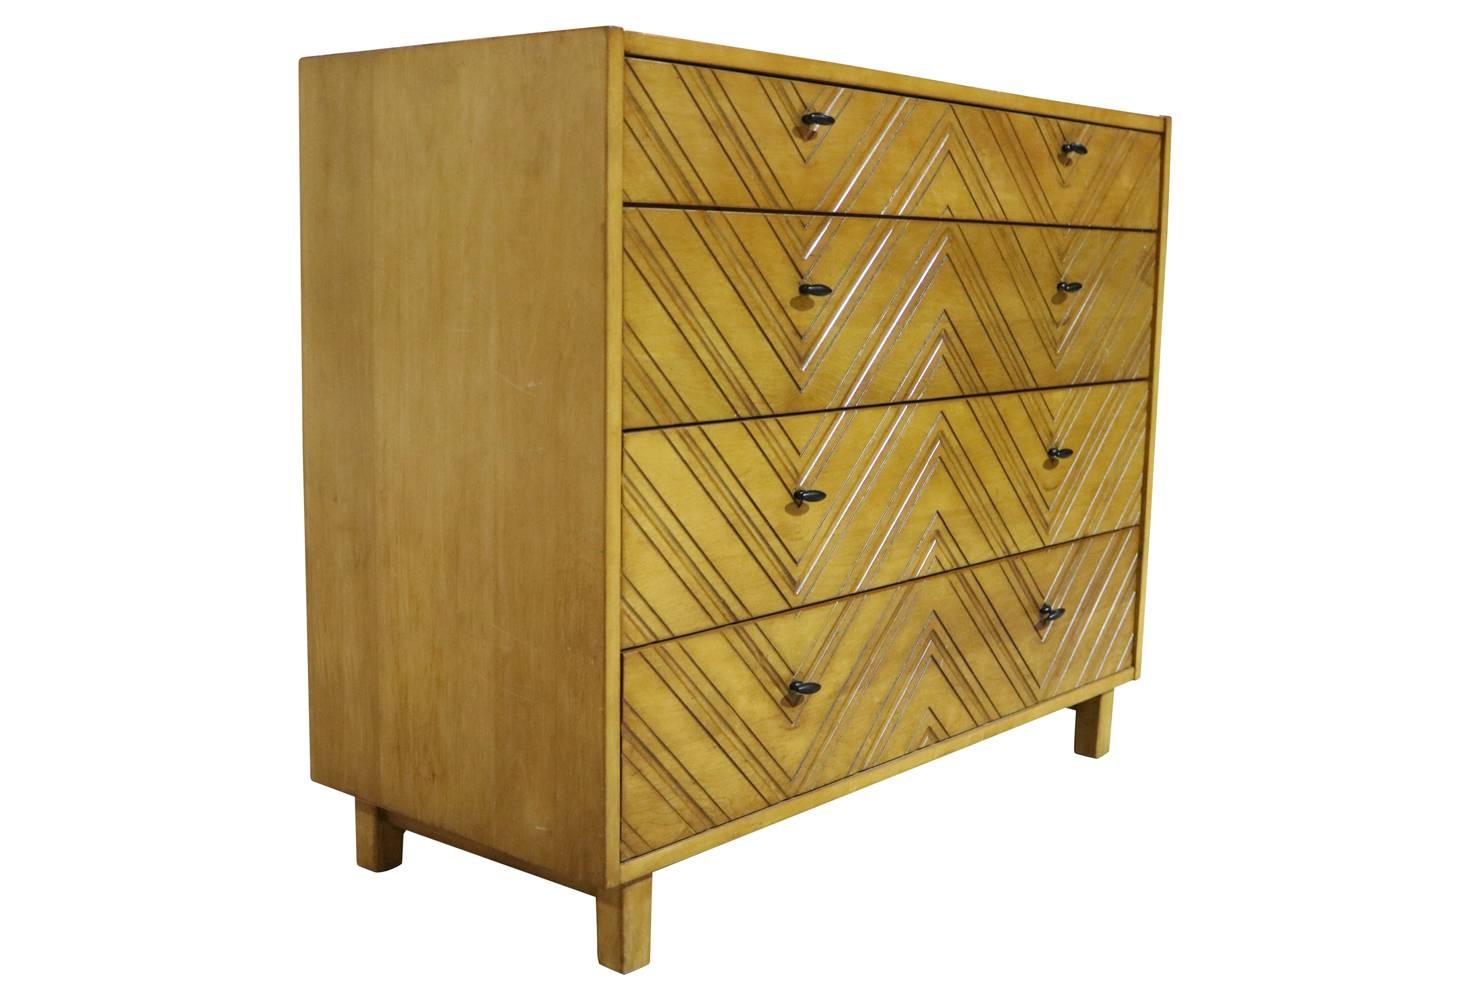 This lovely blonde chest features four drawers with black iron pulls. The front of the chest has been carefully carved with a graphic chevron pattern.